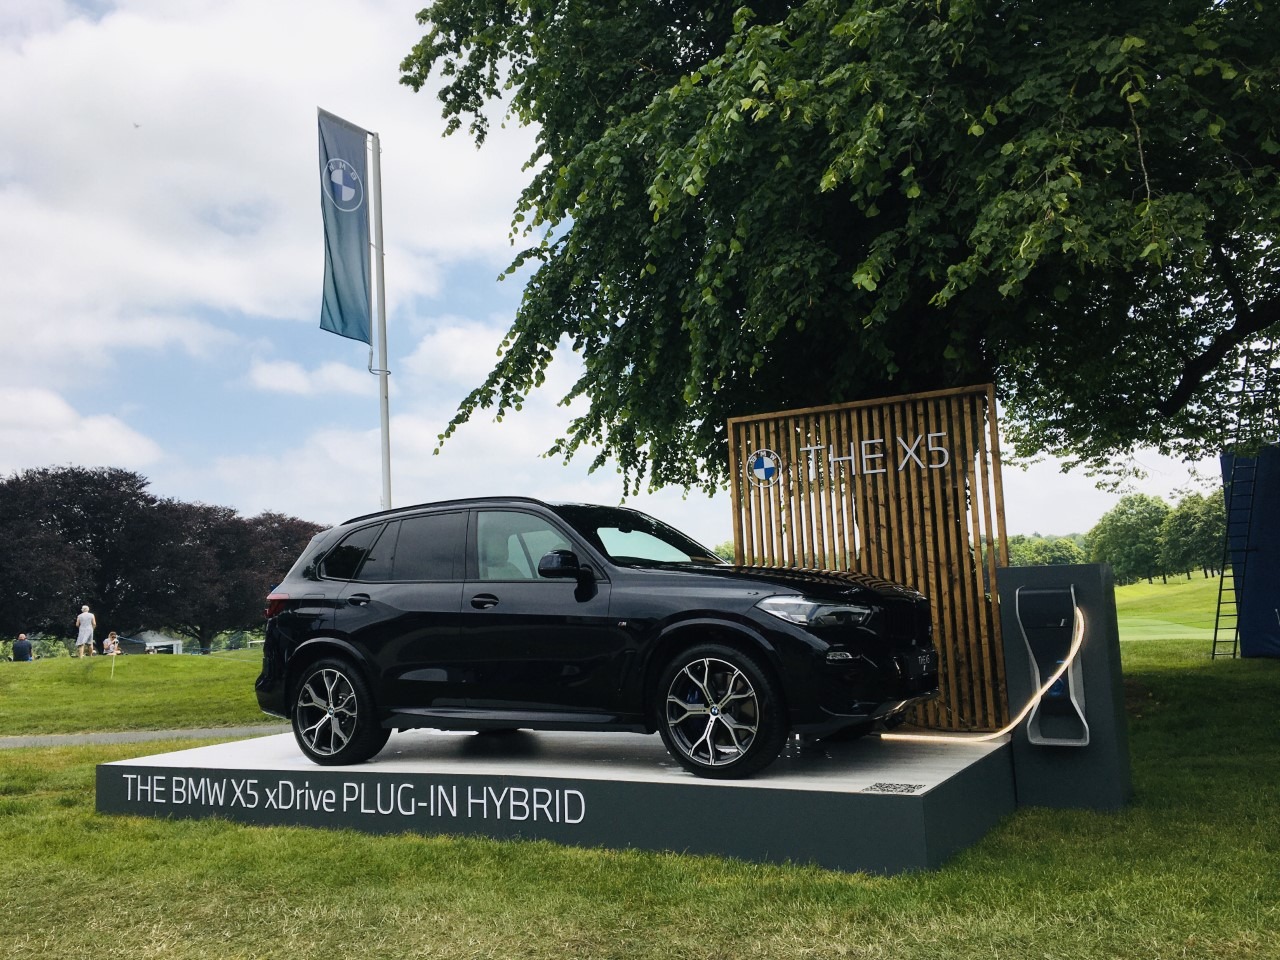 Image of a BMW X5 at the Irish Open 2021